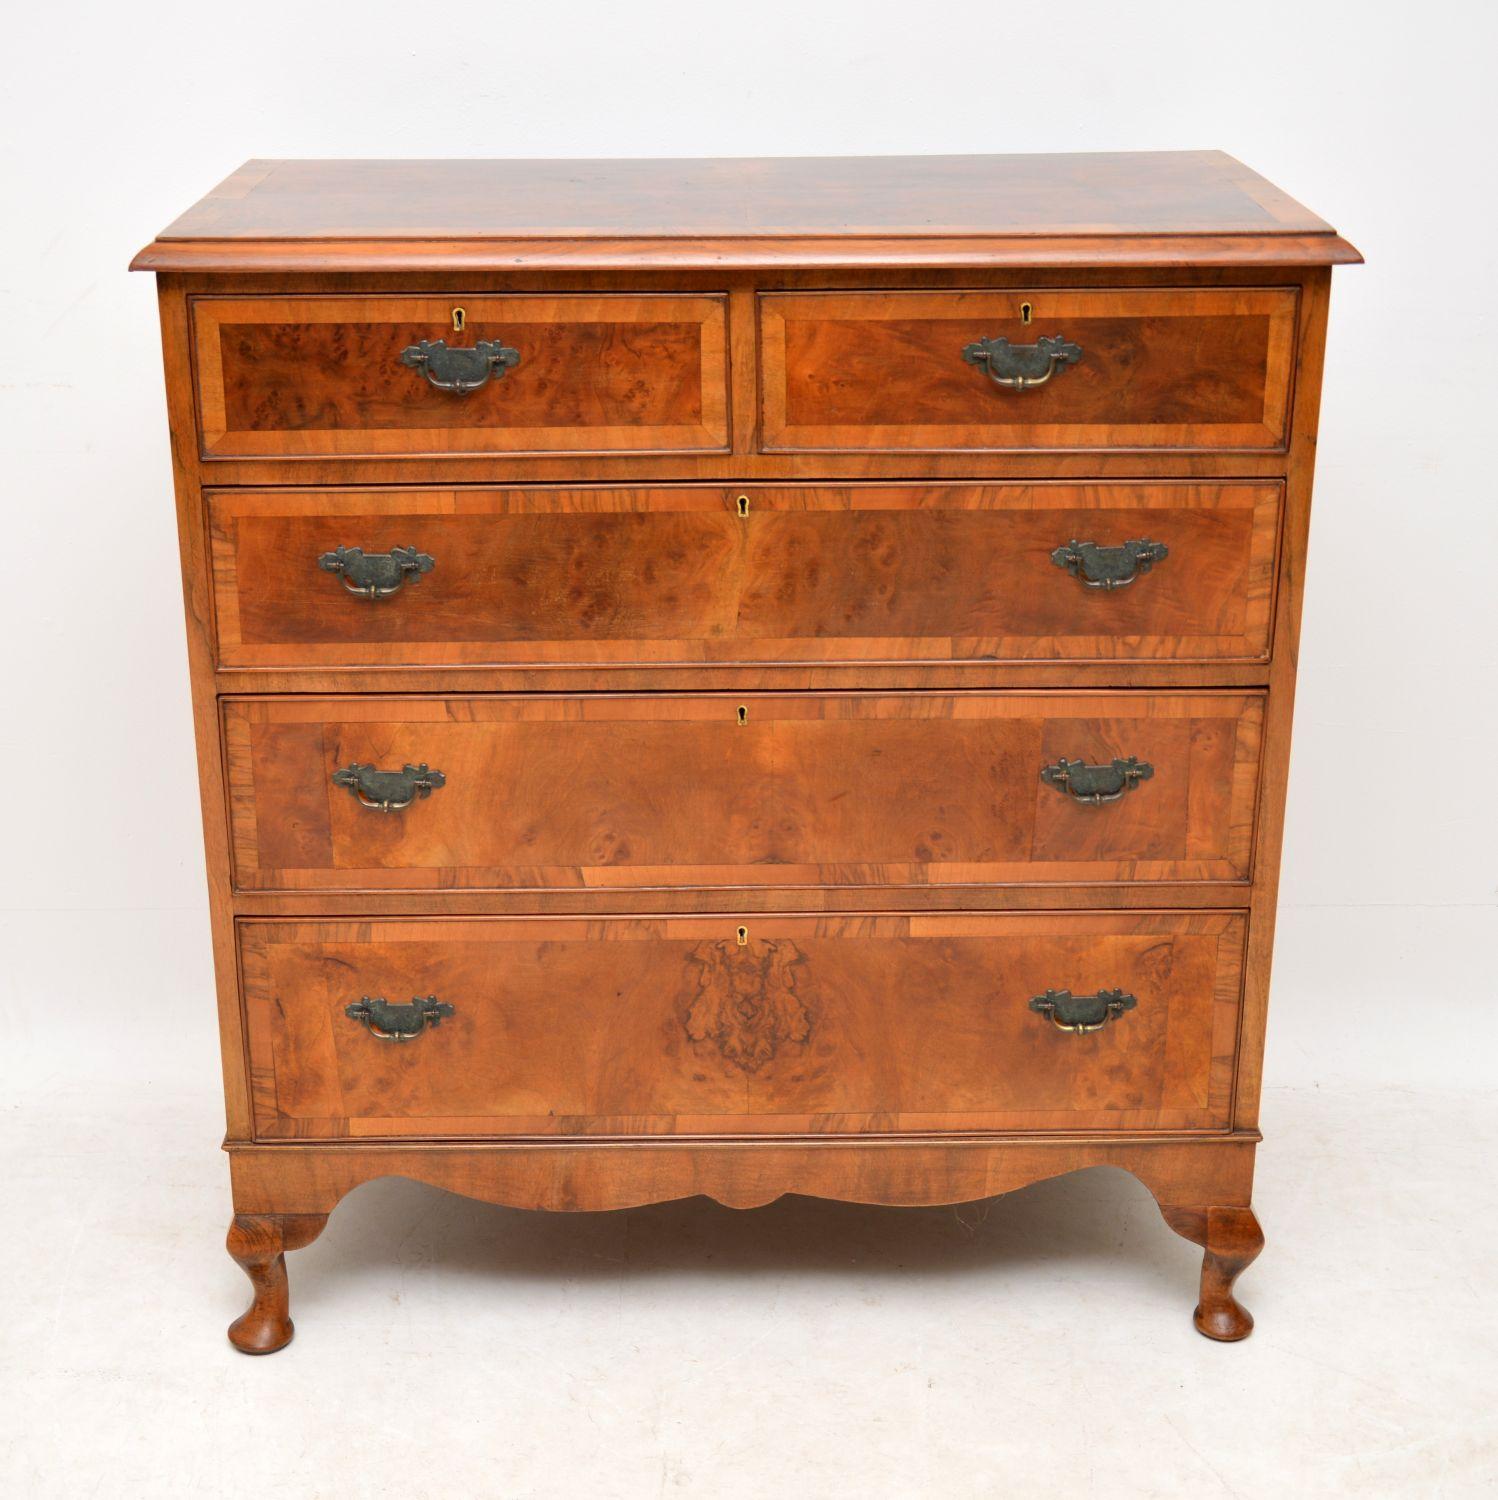 Fine quality walnut chest of drawers in excellent condition and dating to circa 1910s-1920s period. The top and drawer fronts are a beautifully patterned burr walnut with crossbanded edges. The drawers are graduated in depth and have locks, fine